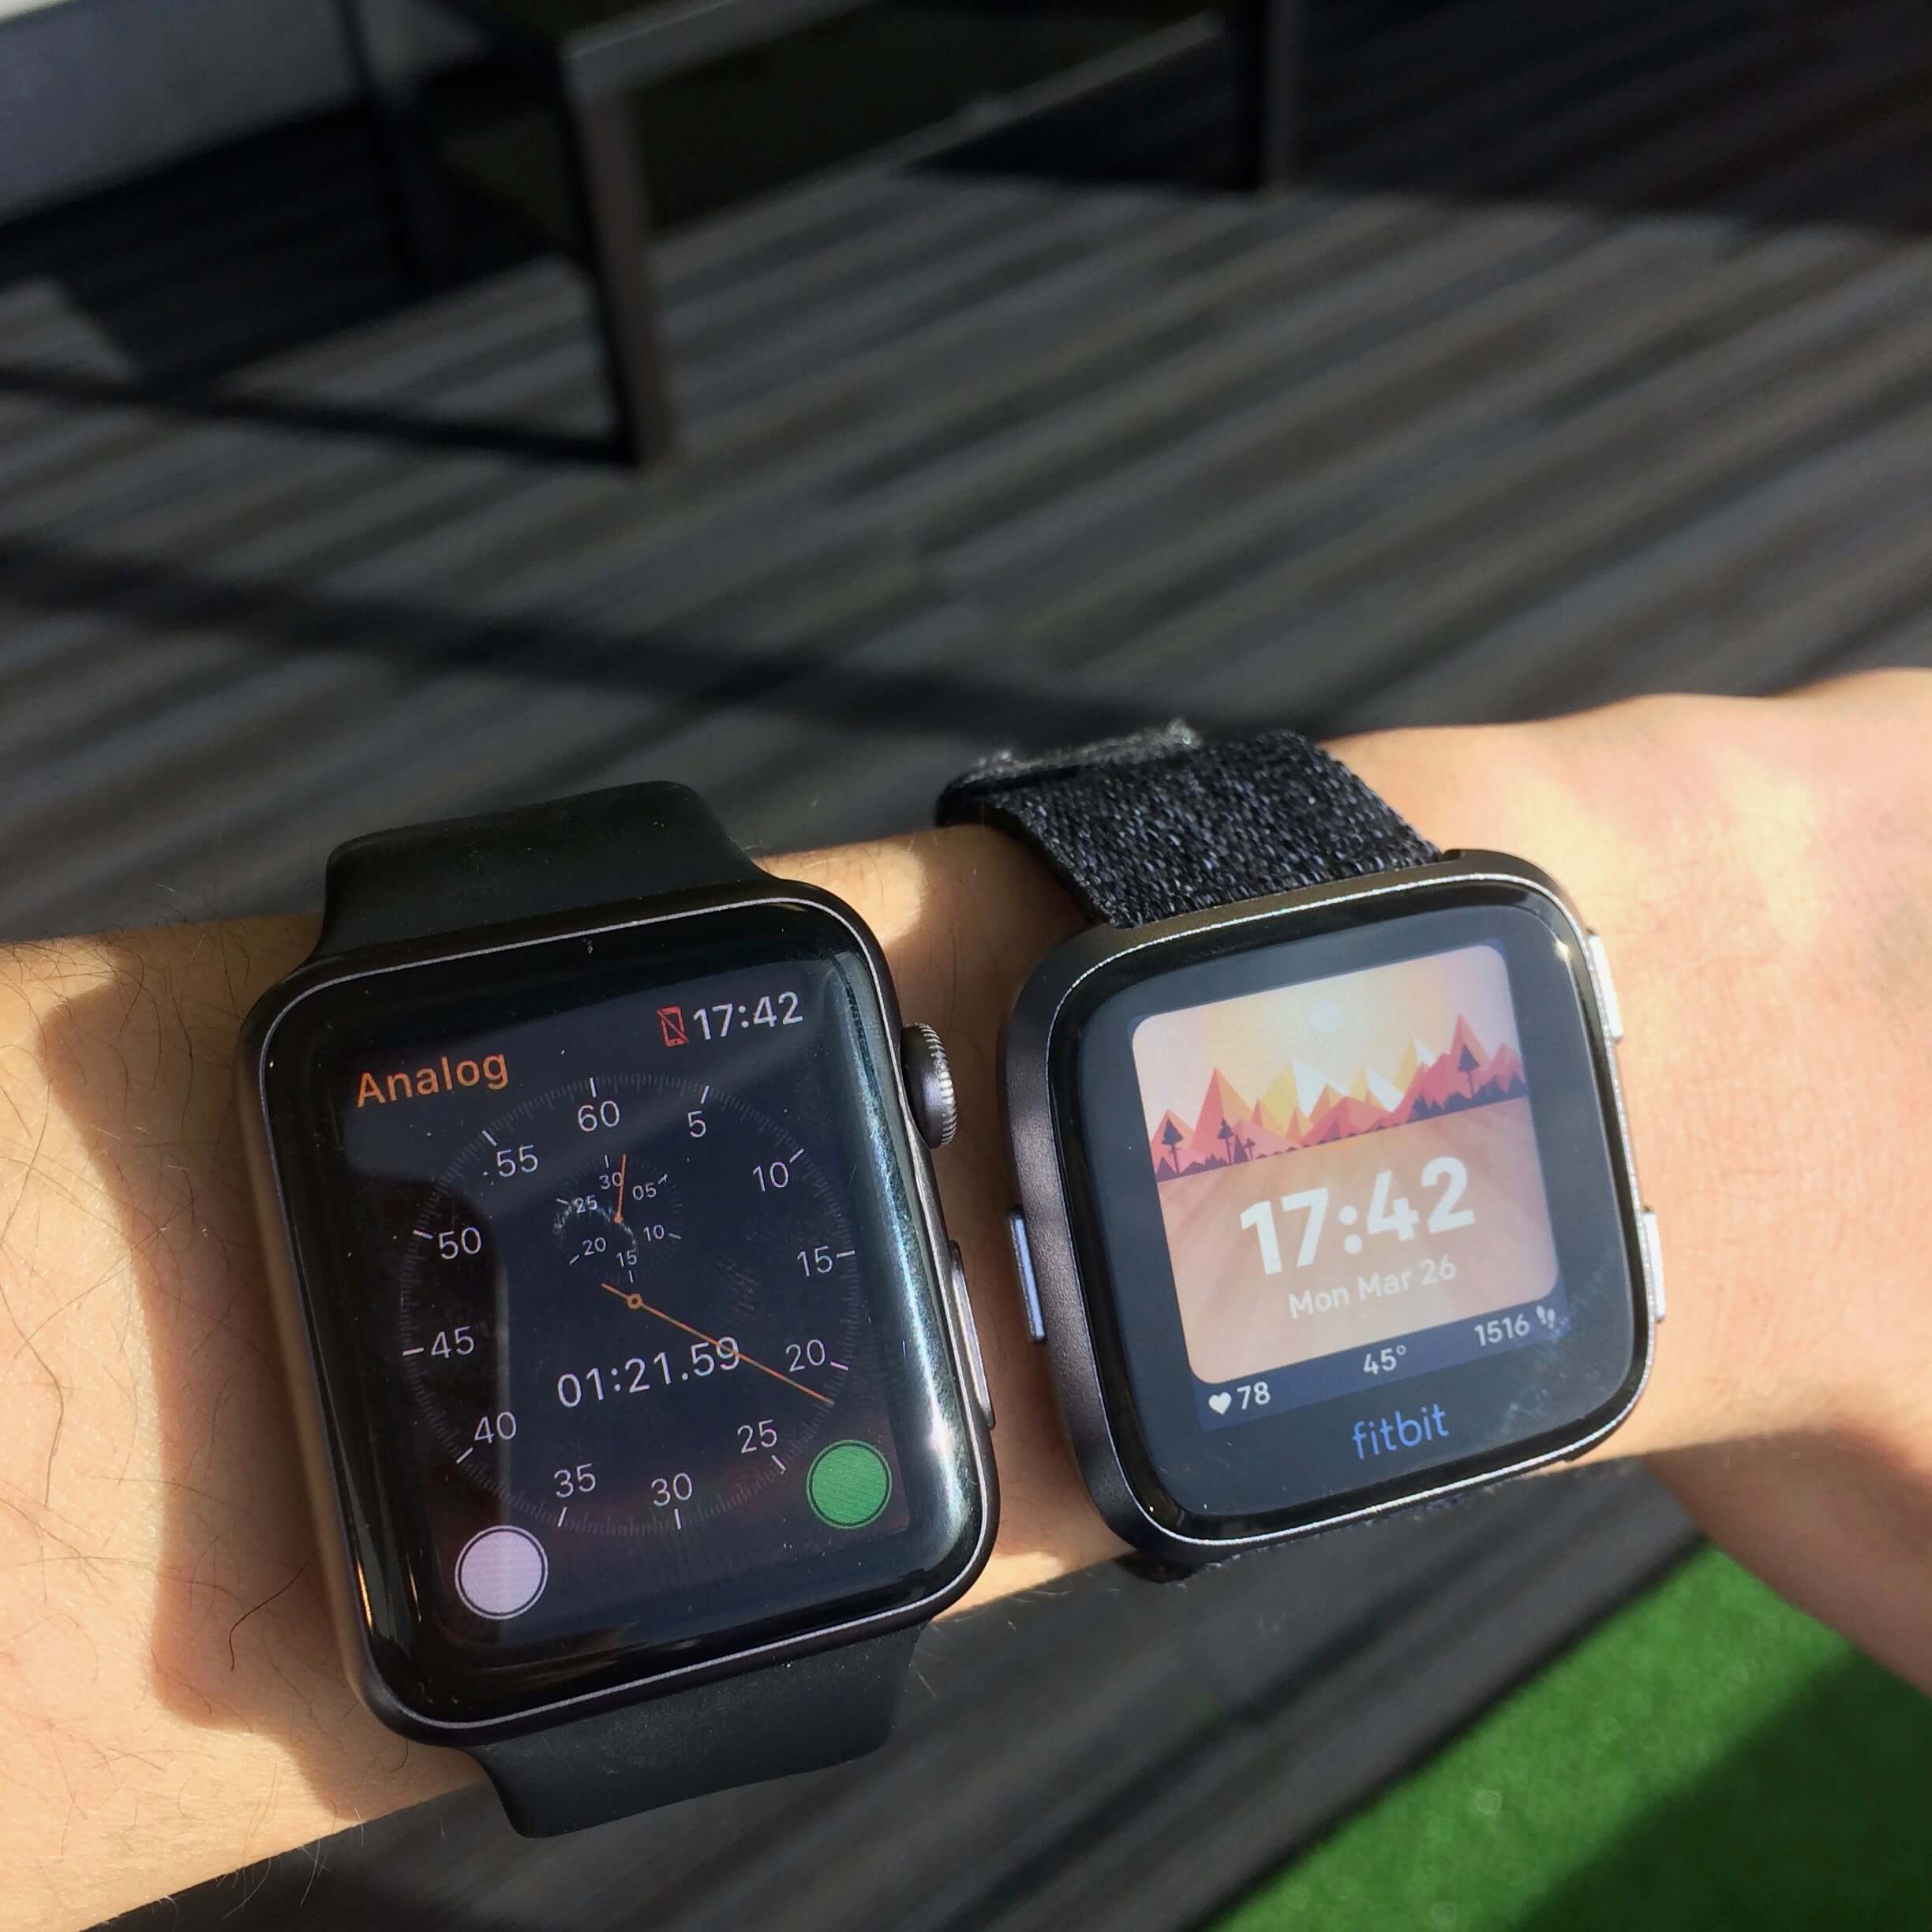 Fitbit Versa on wrist compared to Apple Watch